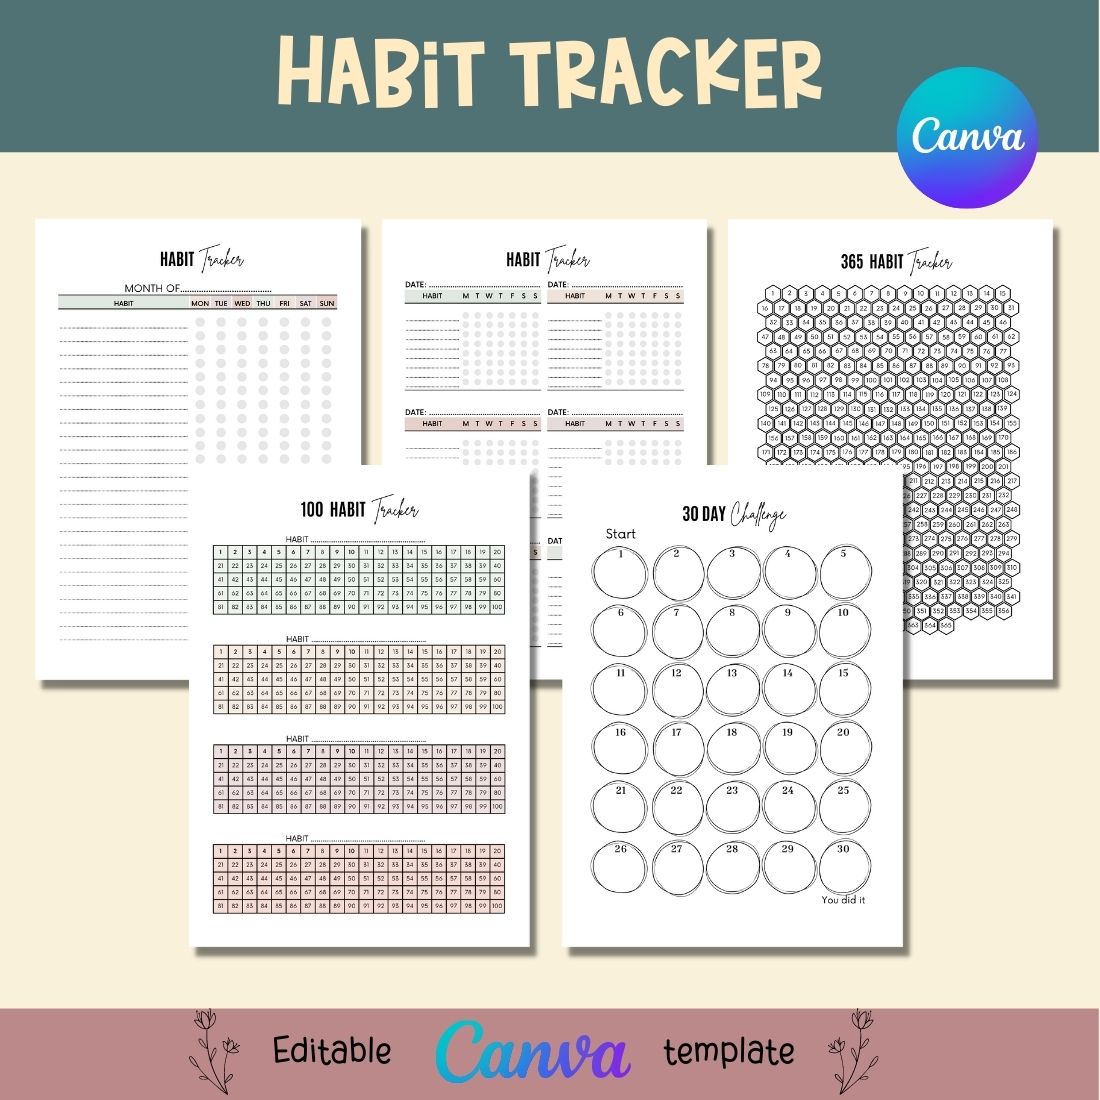 Habit Tracker Canva Templates preview image.